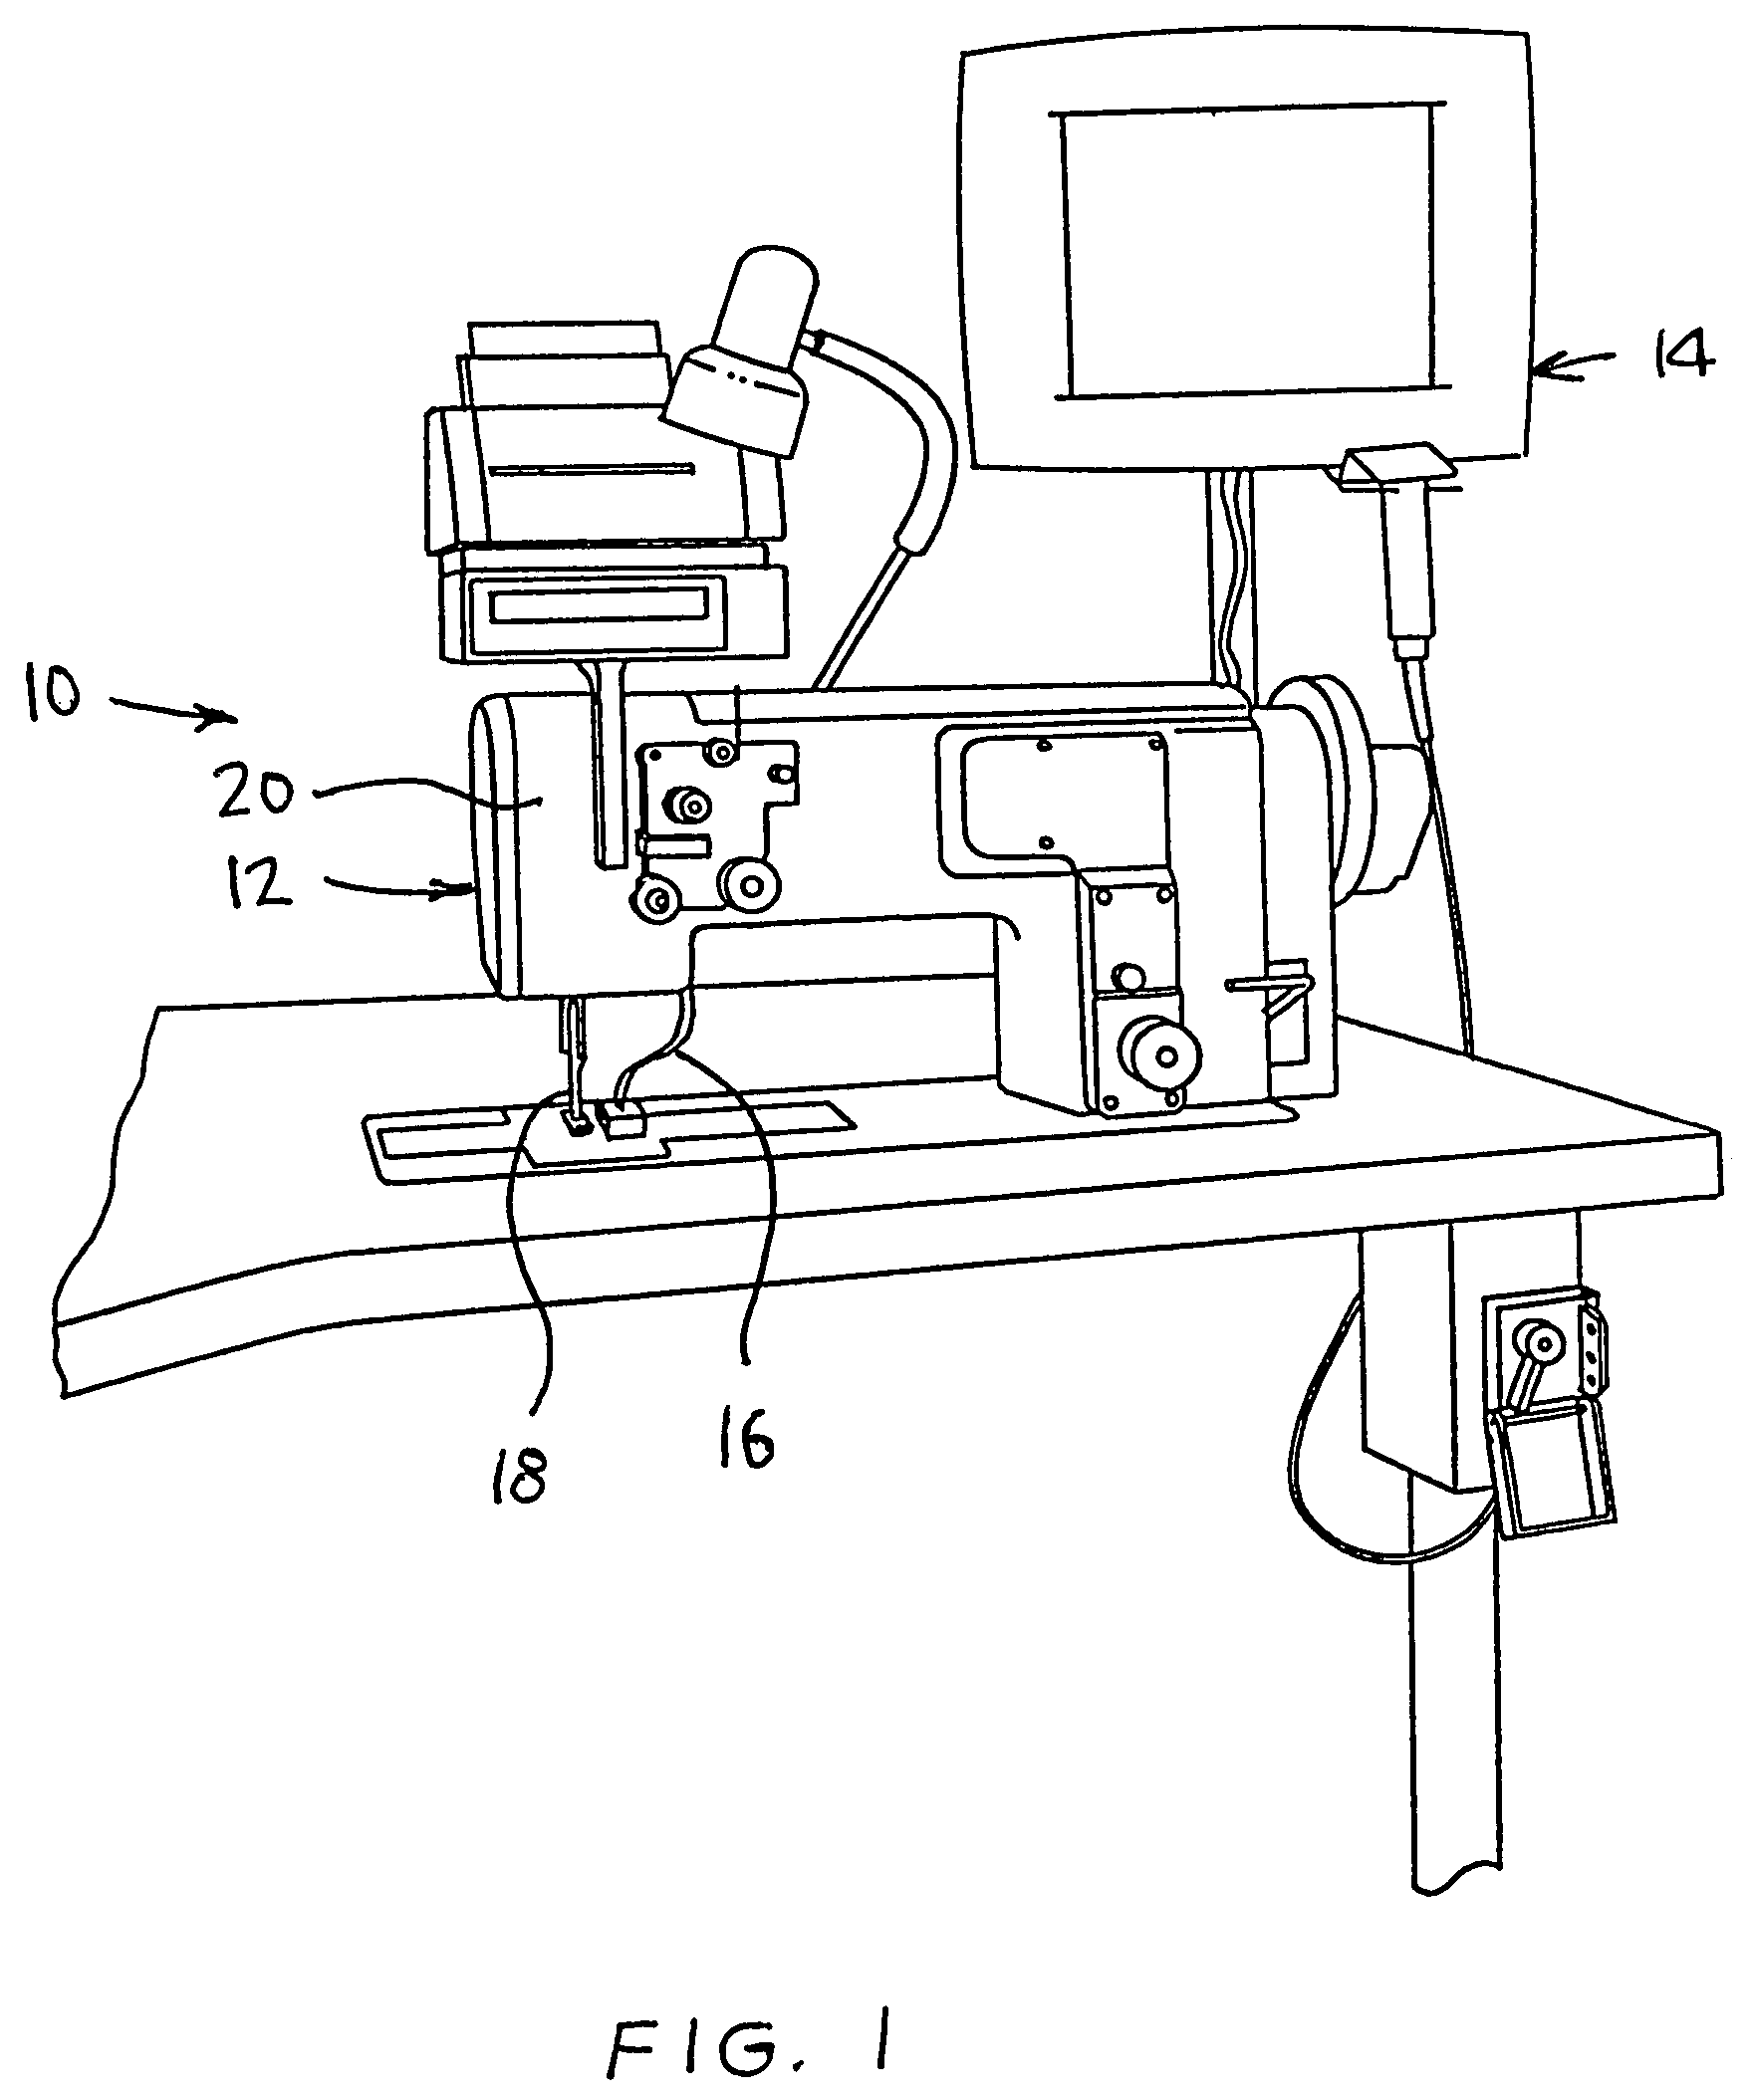 Apparatus for monitoring and controlling thread tensioning force in a sewing machine